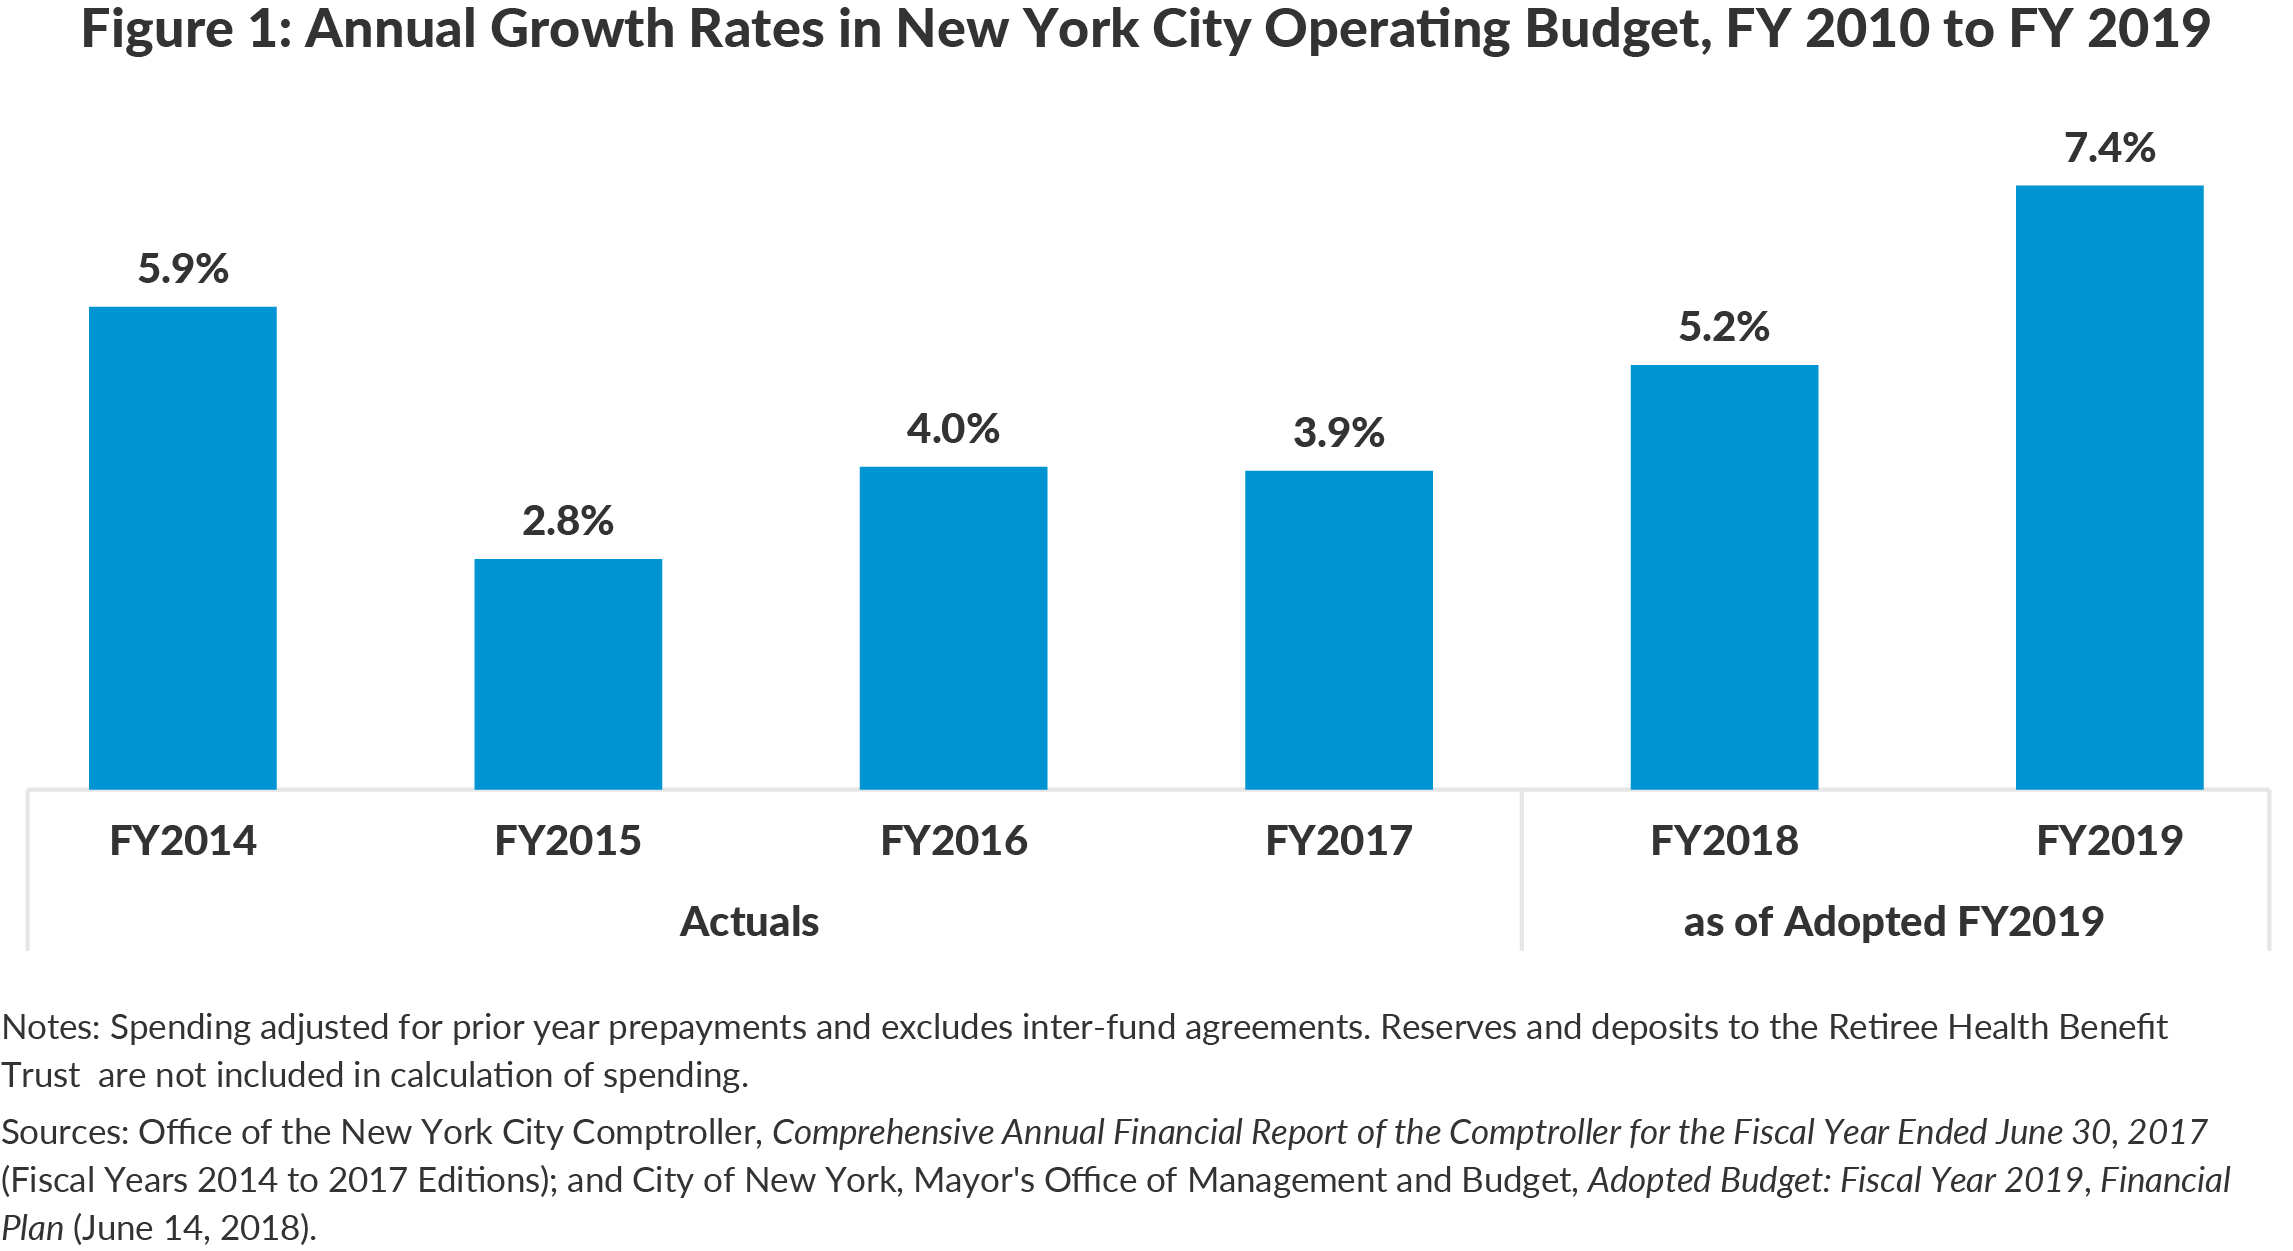 Figure 1: Annual Growth Rates in New York City Operating Budget, FY 2010 to FY 2019